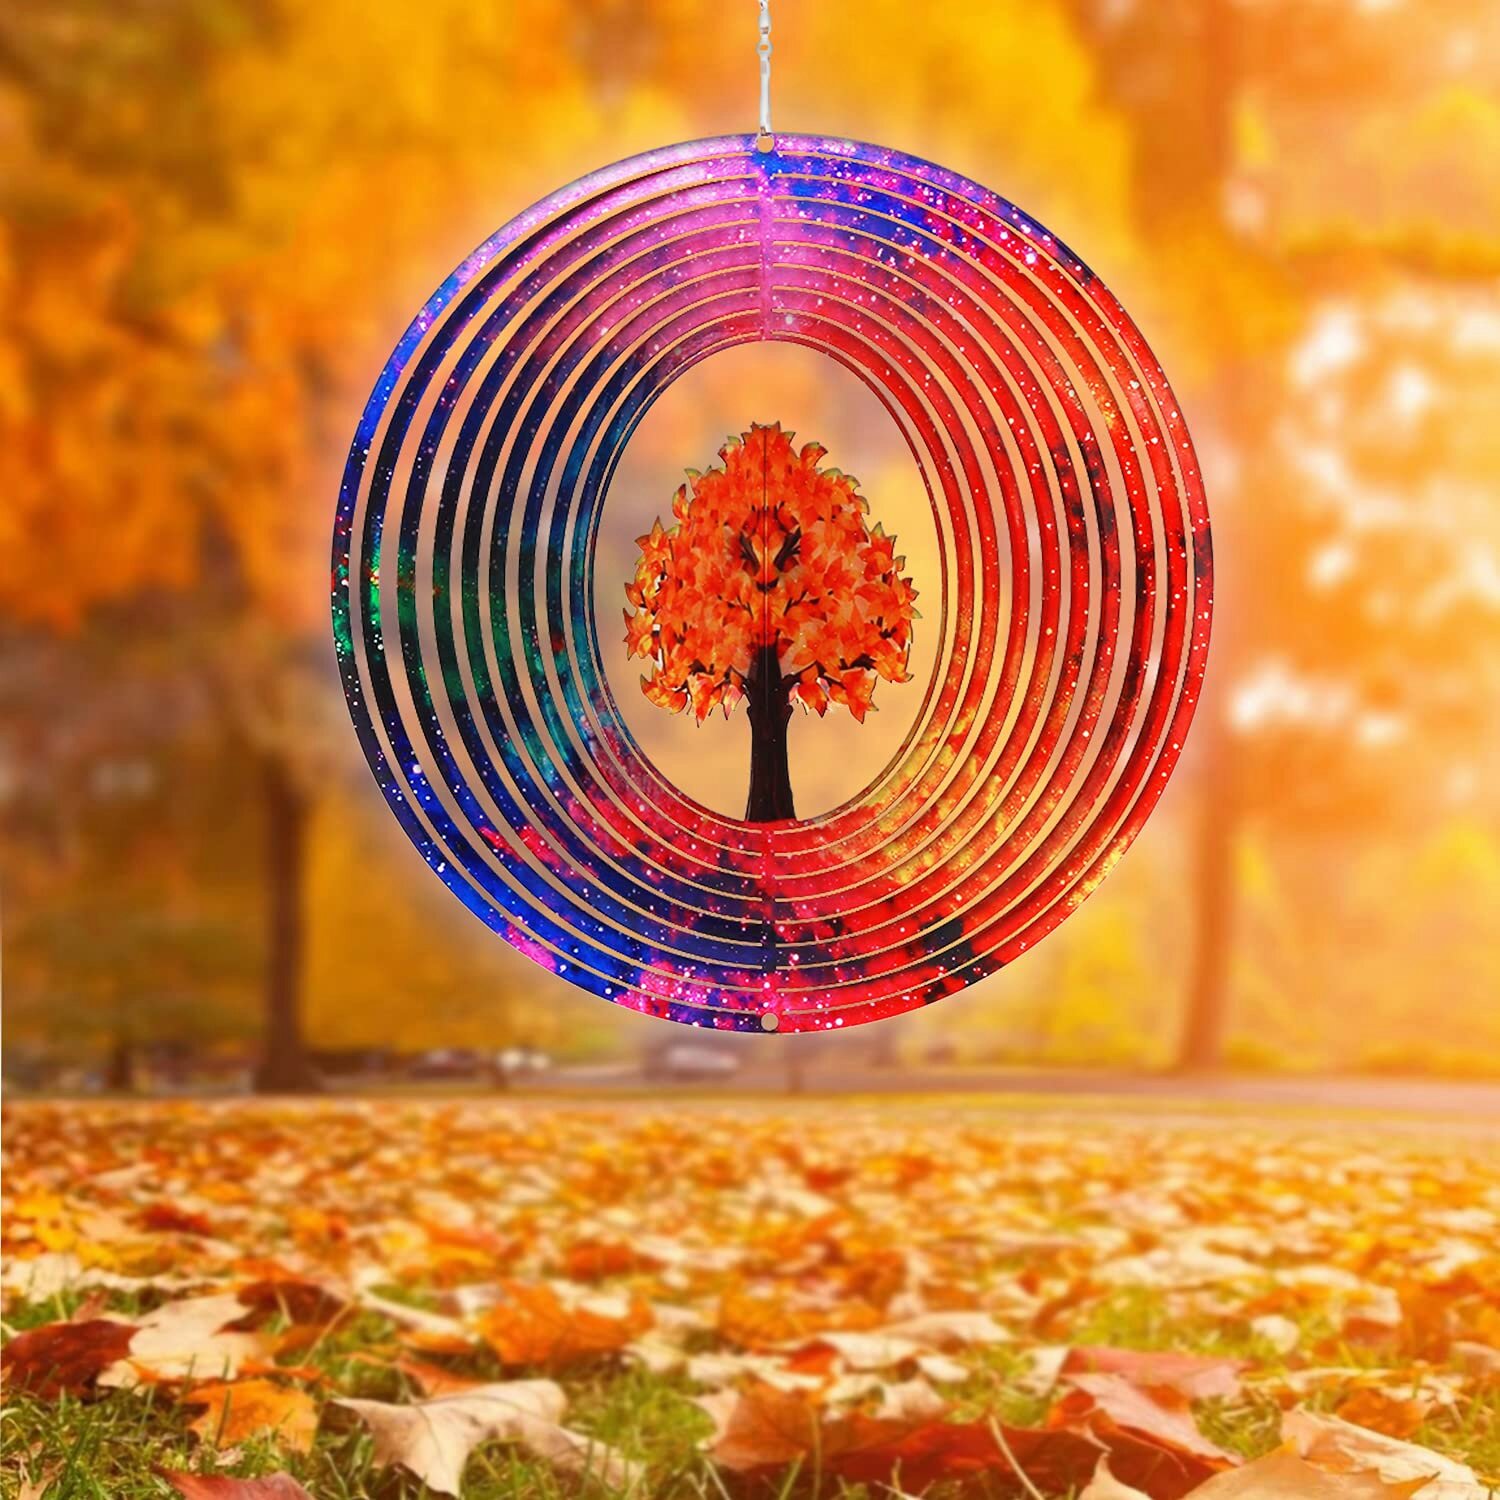 Wind Spinner 3D Stainless Steel Indoor OutdoorTree Of Life Garden  Decoration Crafts Ornaments Kinetic Yard Art, Hanging Wind Spinners Decor  Gifts